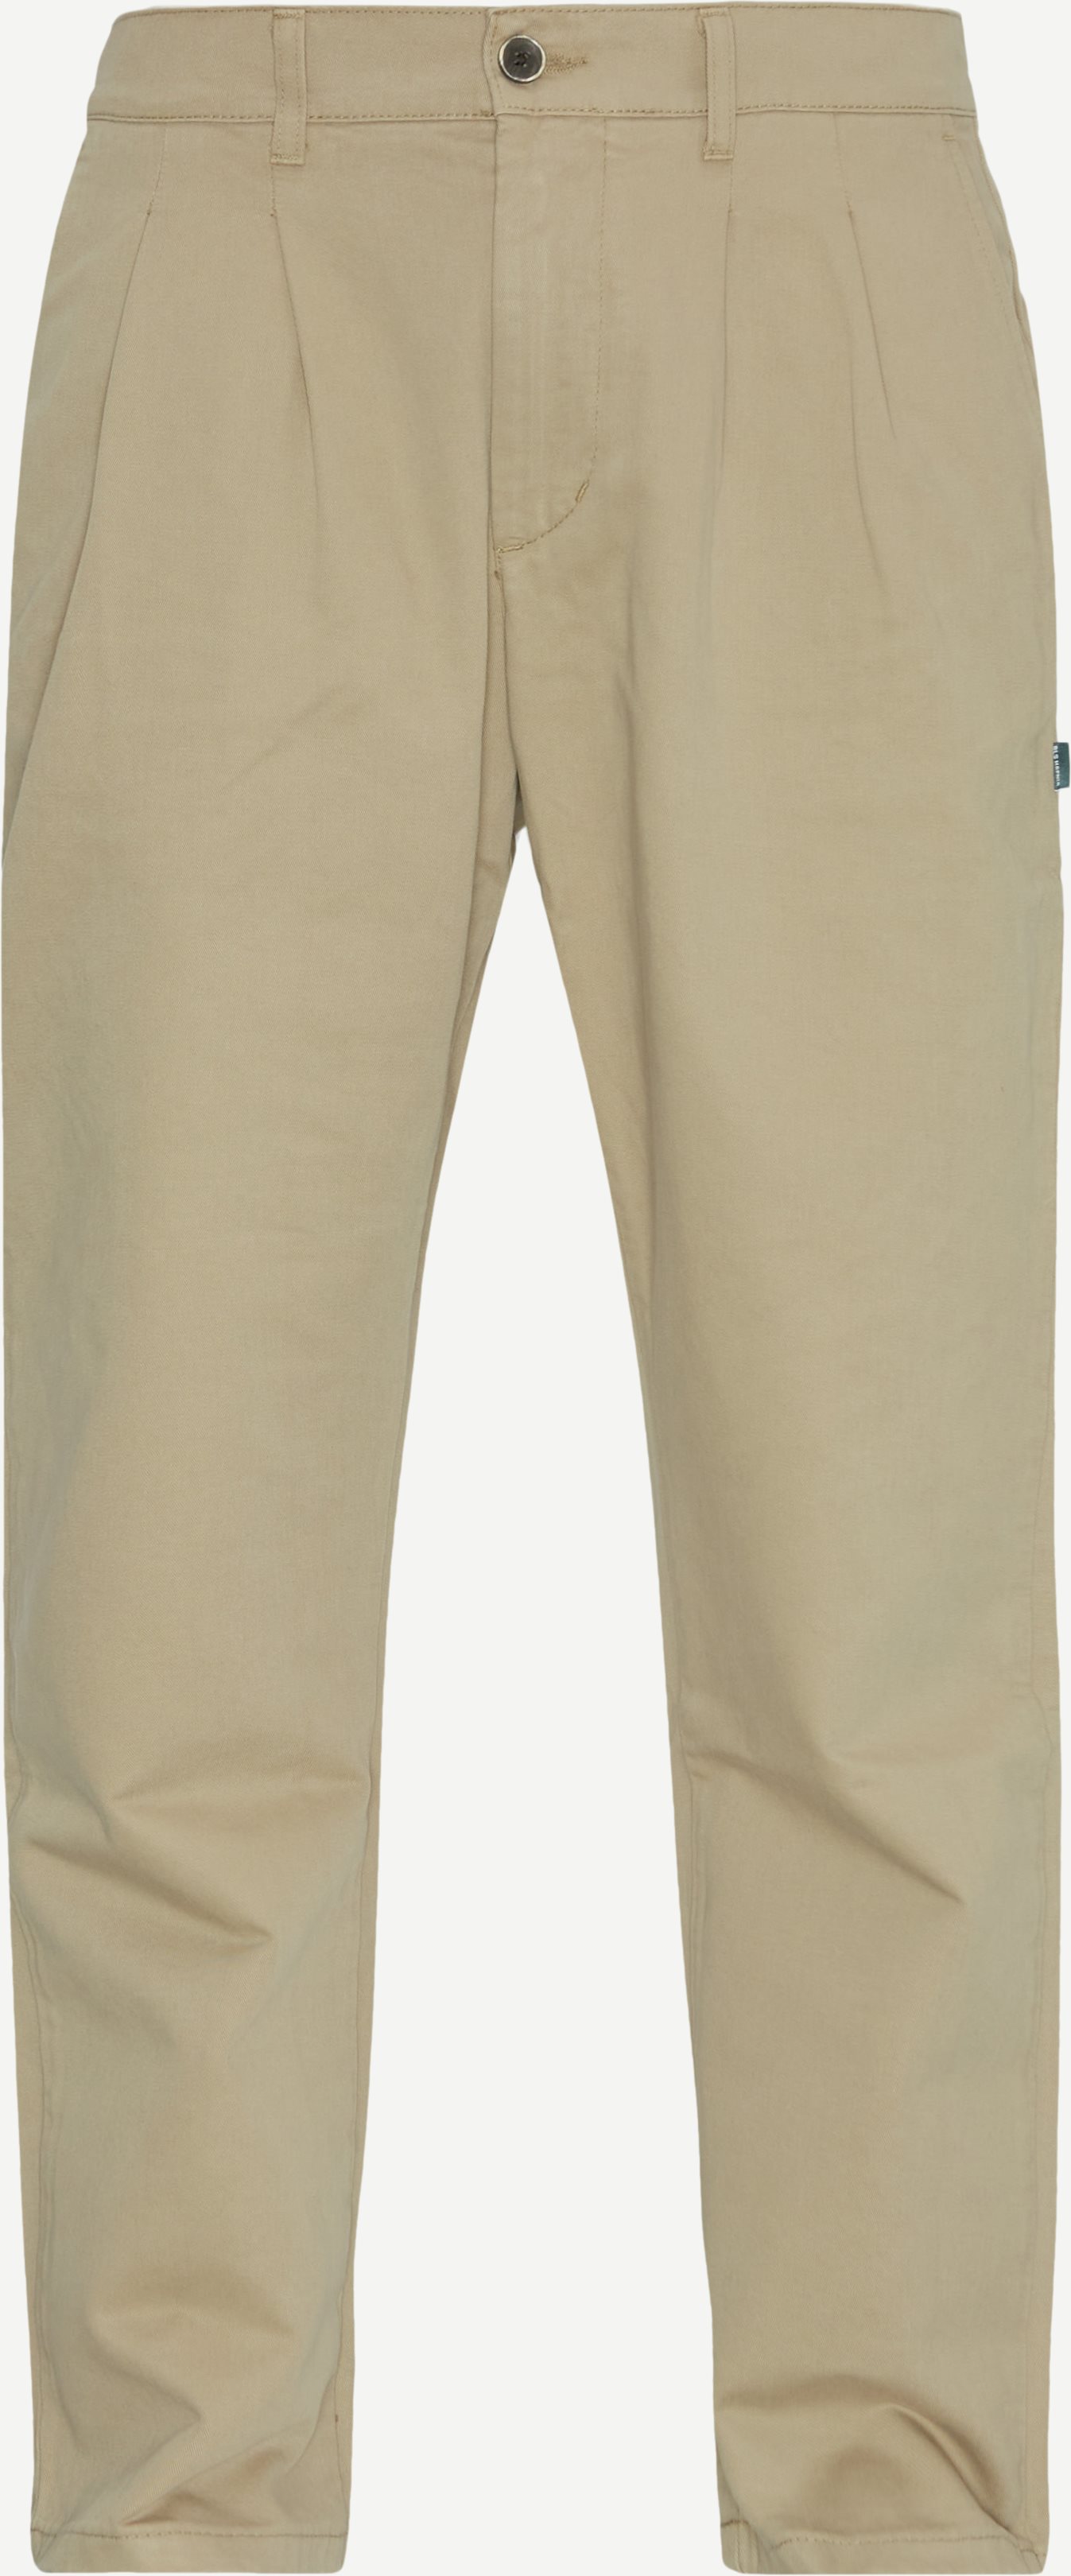 BLS Trousers MOLTISANTI CHINOS 202403037 Sand